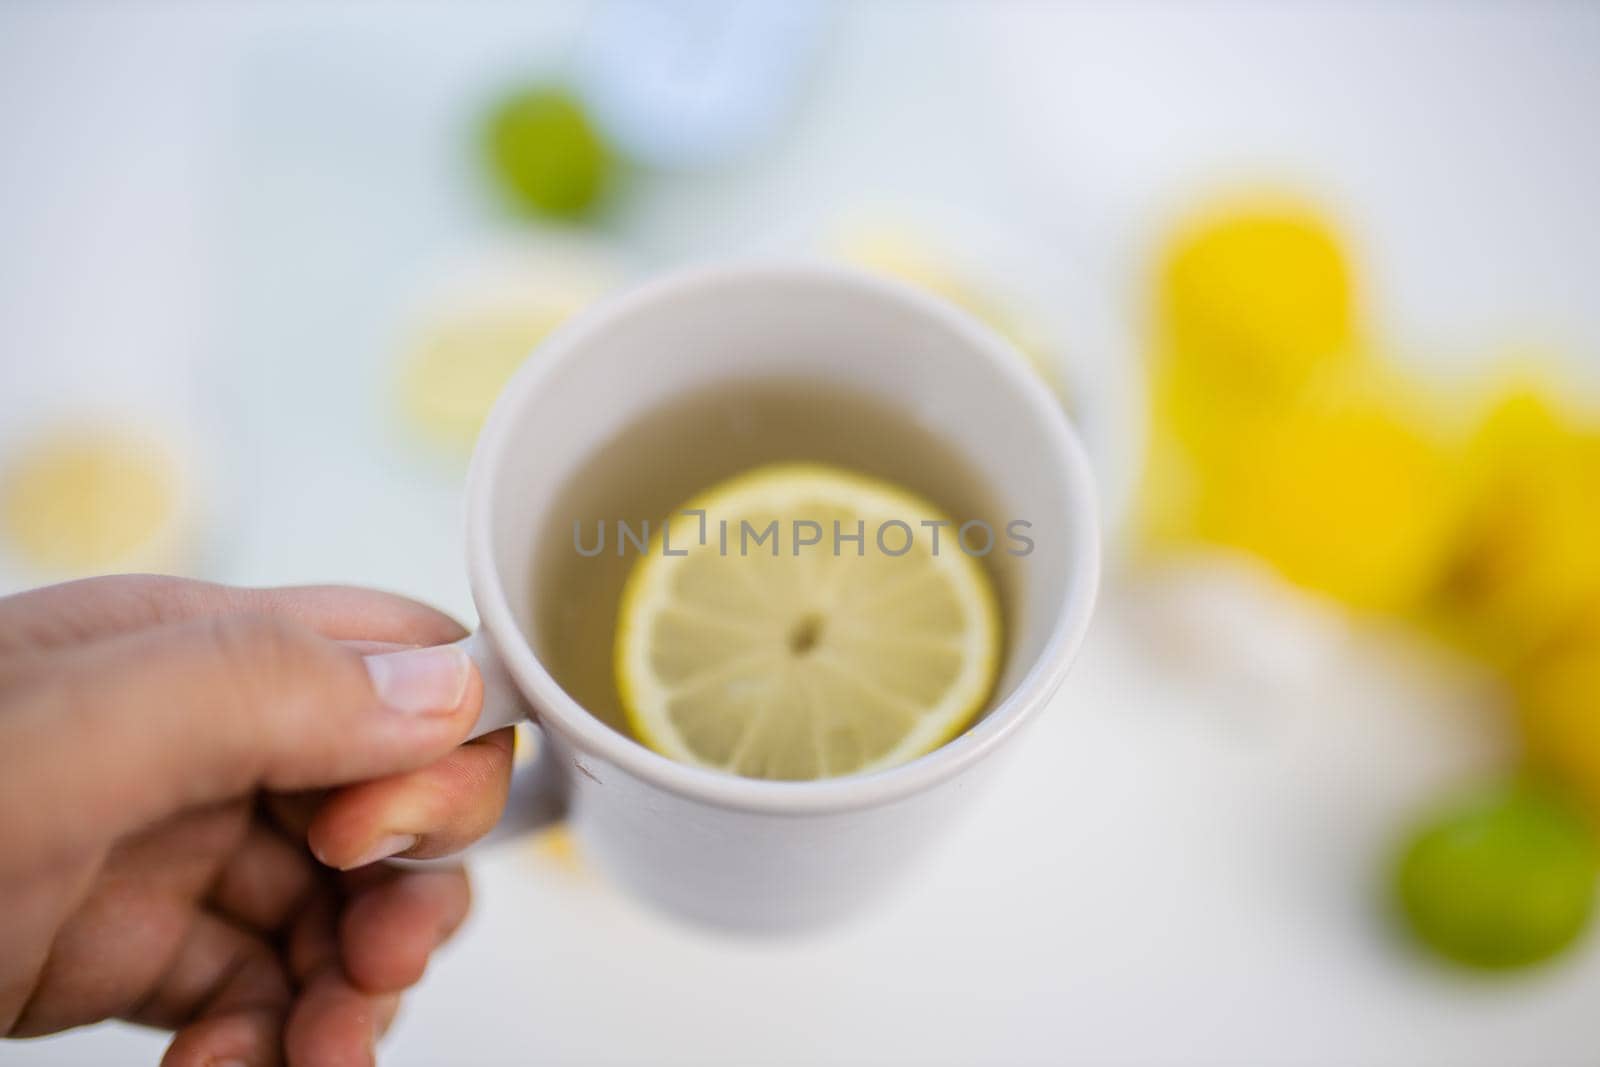 Female hand holding cup of lemon tea above blurry white table with limes and lemons. Woman holding white mug with lemon slice floating inside. Sweet citric beverages